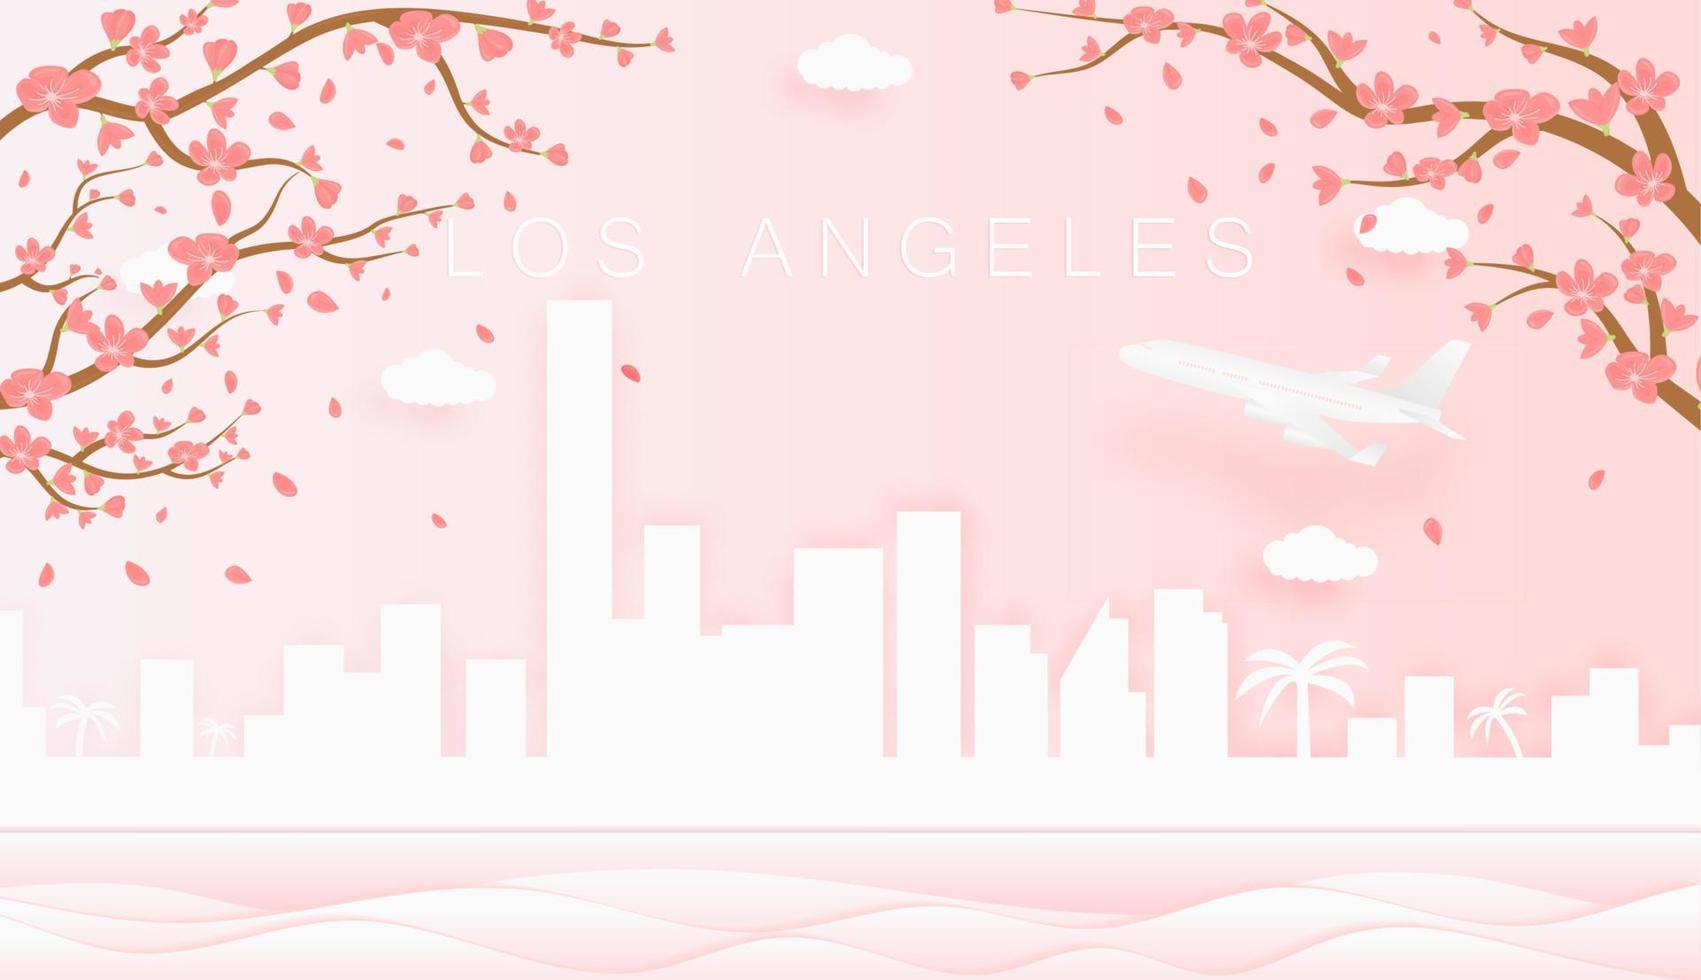 Panorama travel postcard, poster, tour advertising of world famous landmarks of Los Angeles, spring season with blooming flowers in tree vector icon